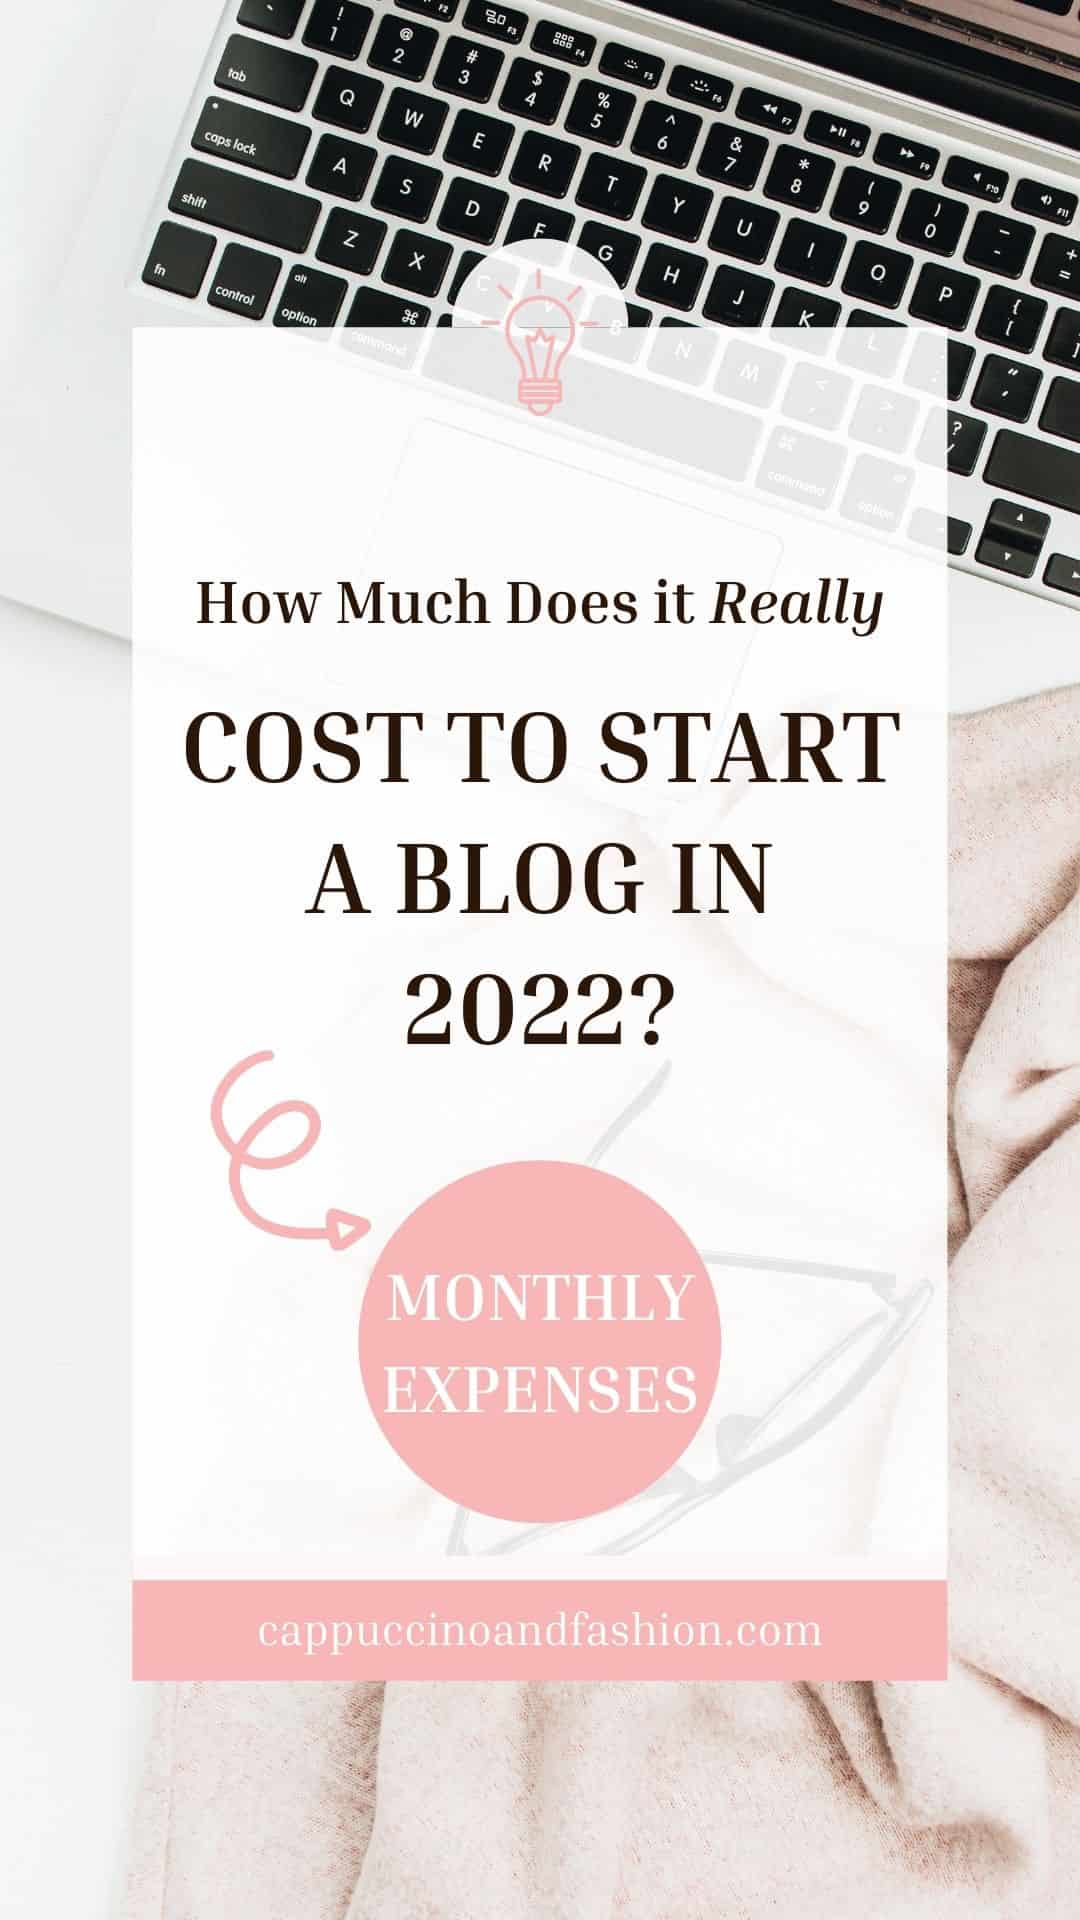 How Much Does It Cost to Start a Blog in 2022 and Monthly Expenses of a Full Time Blogger